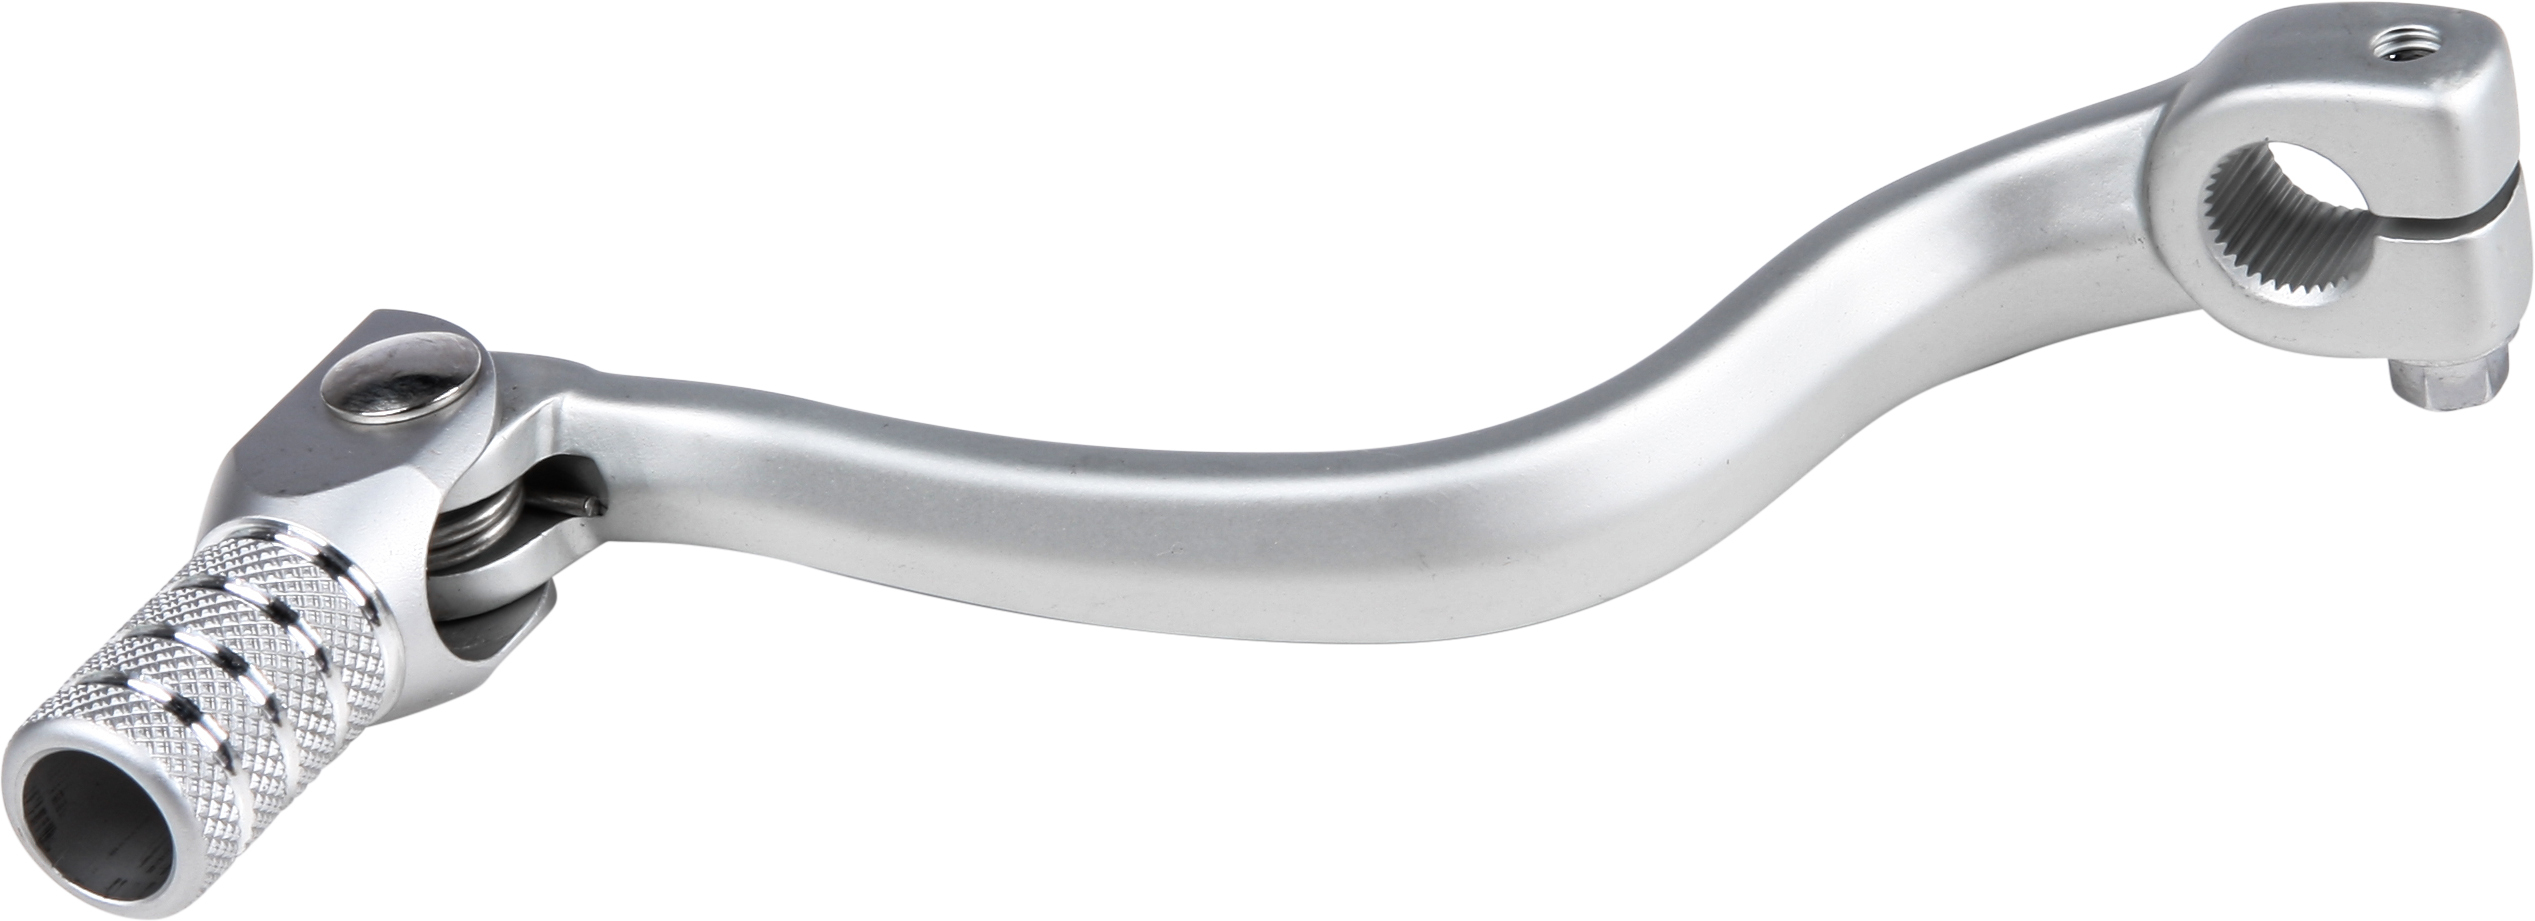 Fire Power - Oem Style Shift Lever Silver - WP83-88049